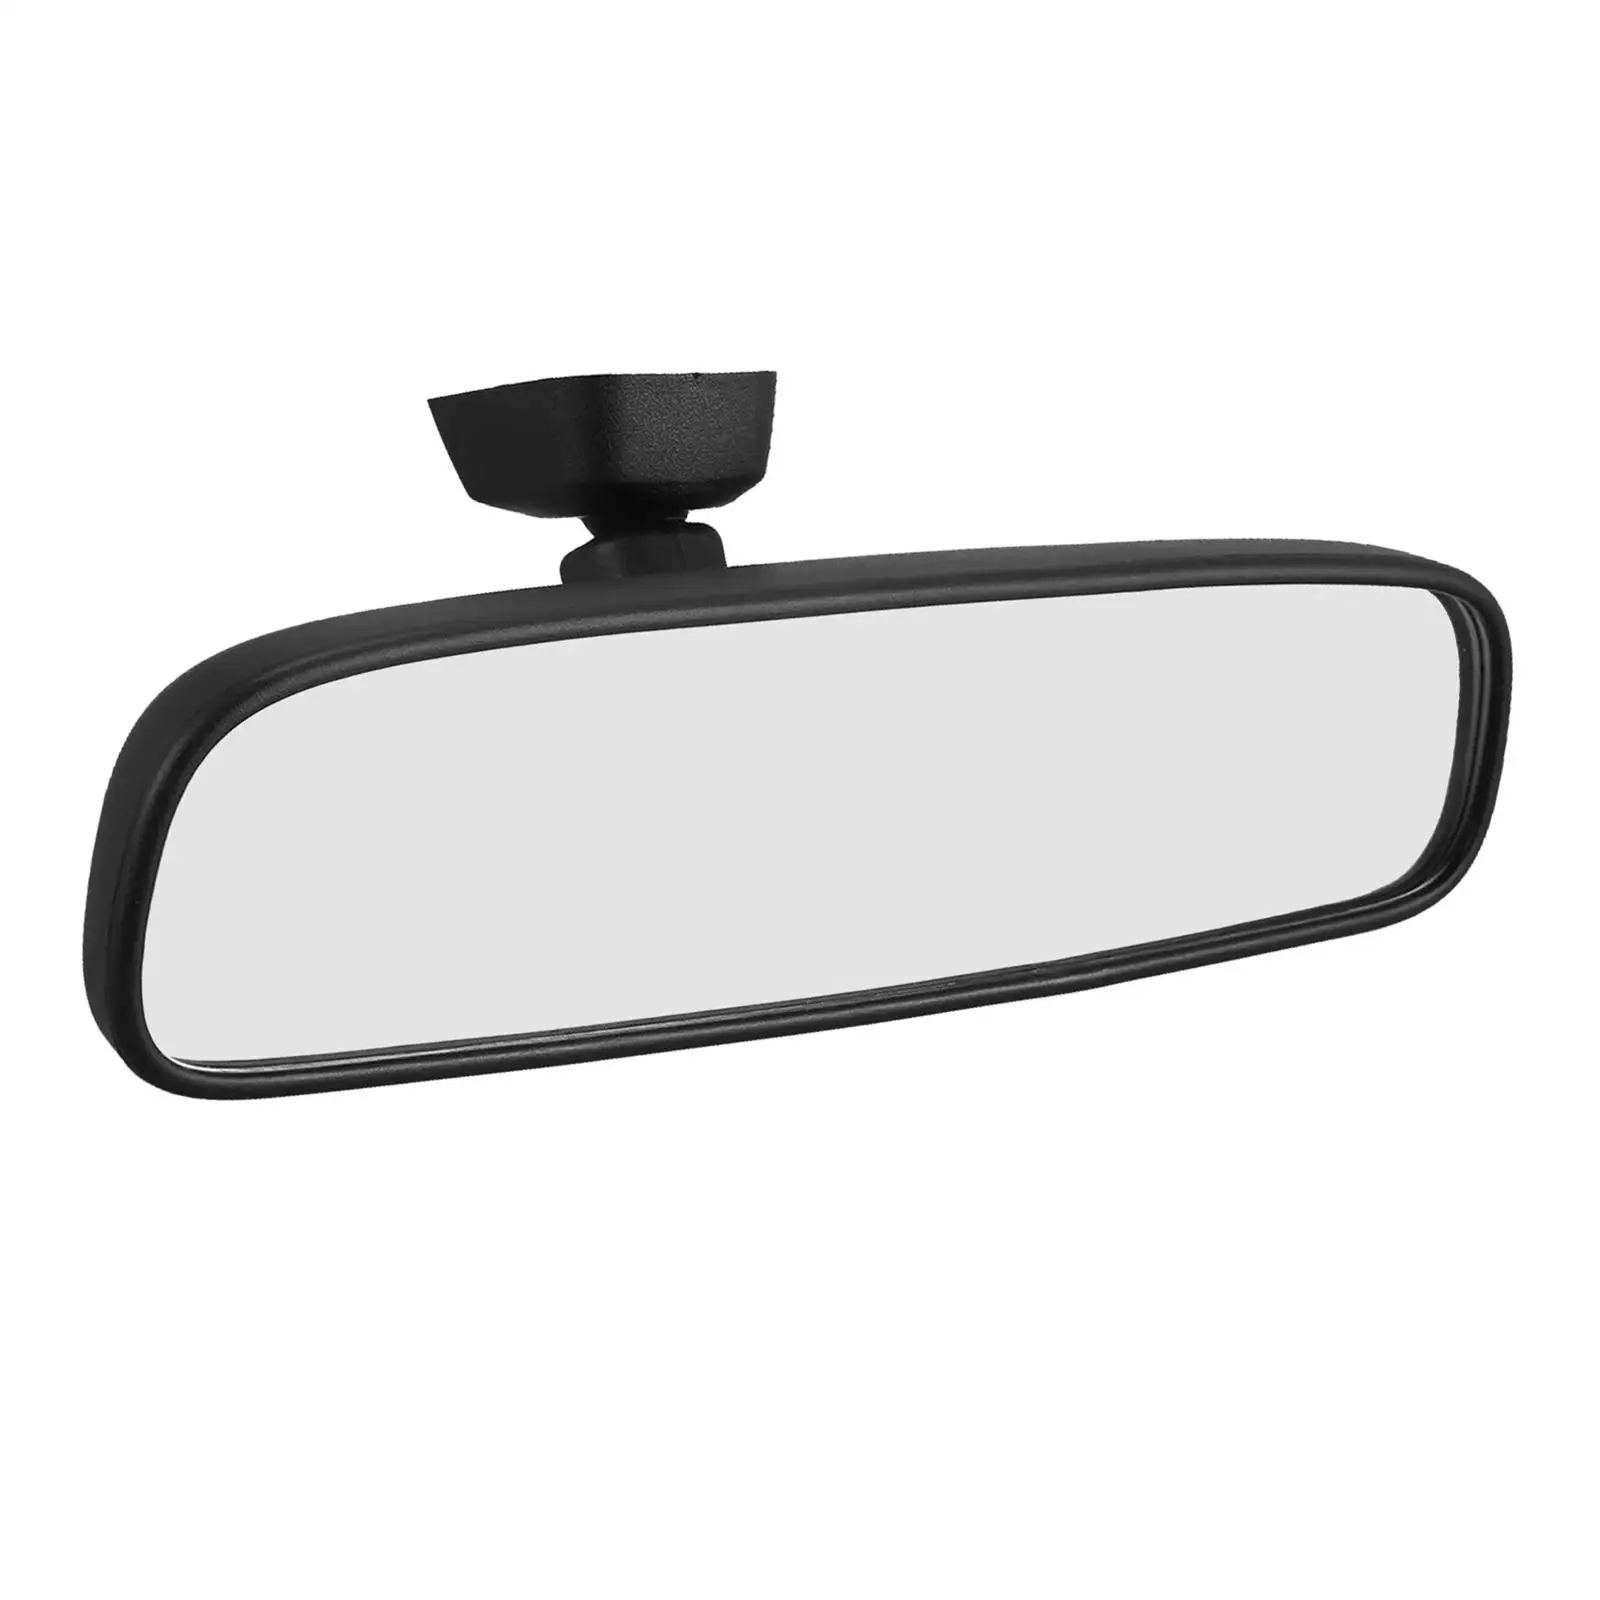 Interior Rear View Mirror 76400-sea-305 Replaces Assembly Day Night Mirror Car